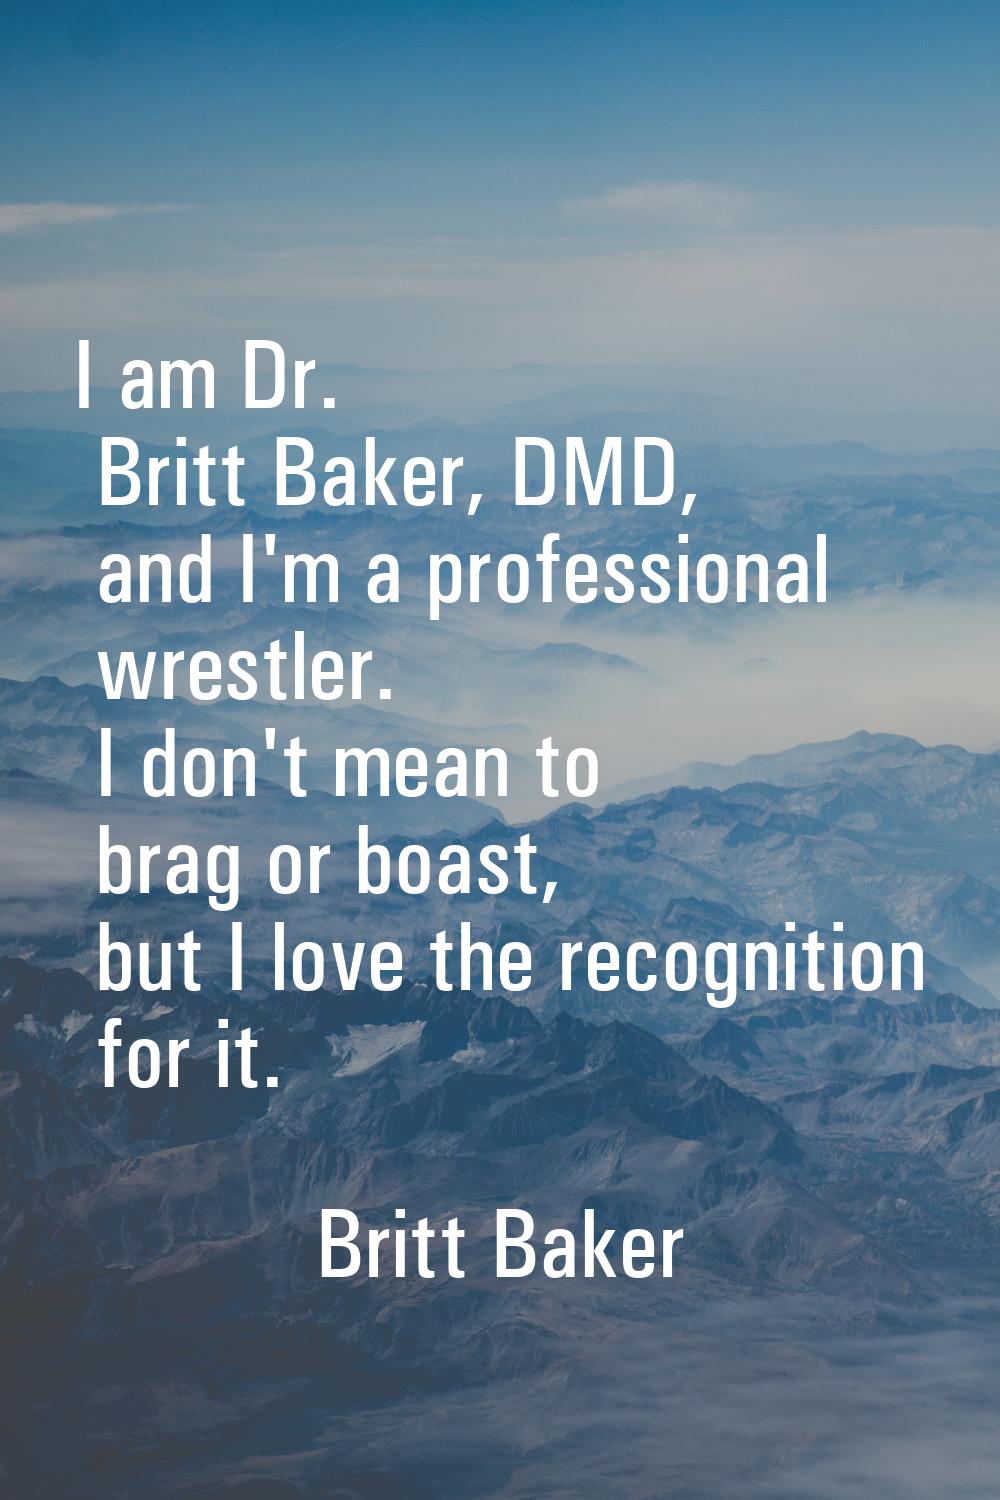 I am Dr. Britt Baker, DMD, and I'm a professional wrestler. I don't mean to brag or boast, but I lo